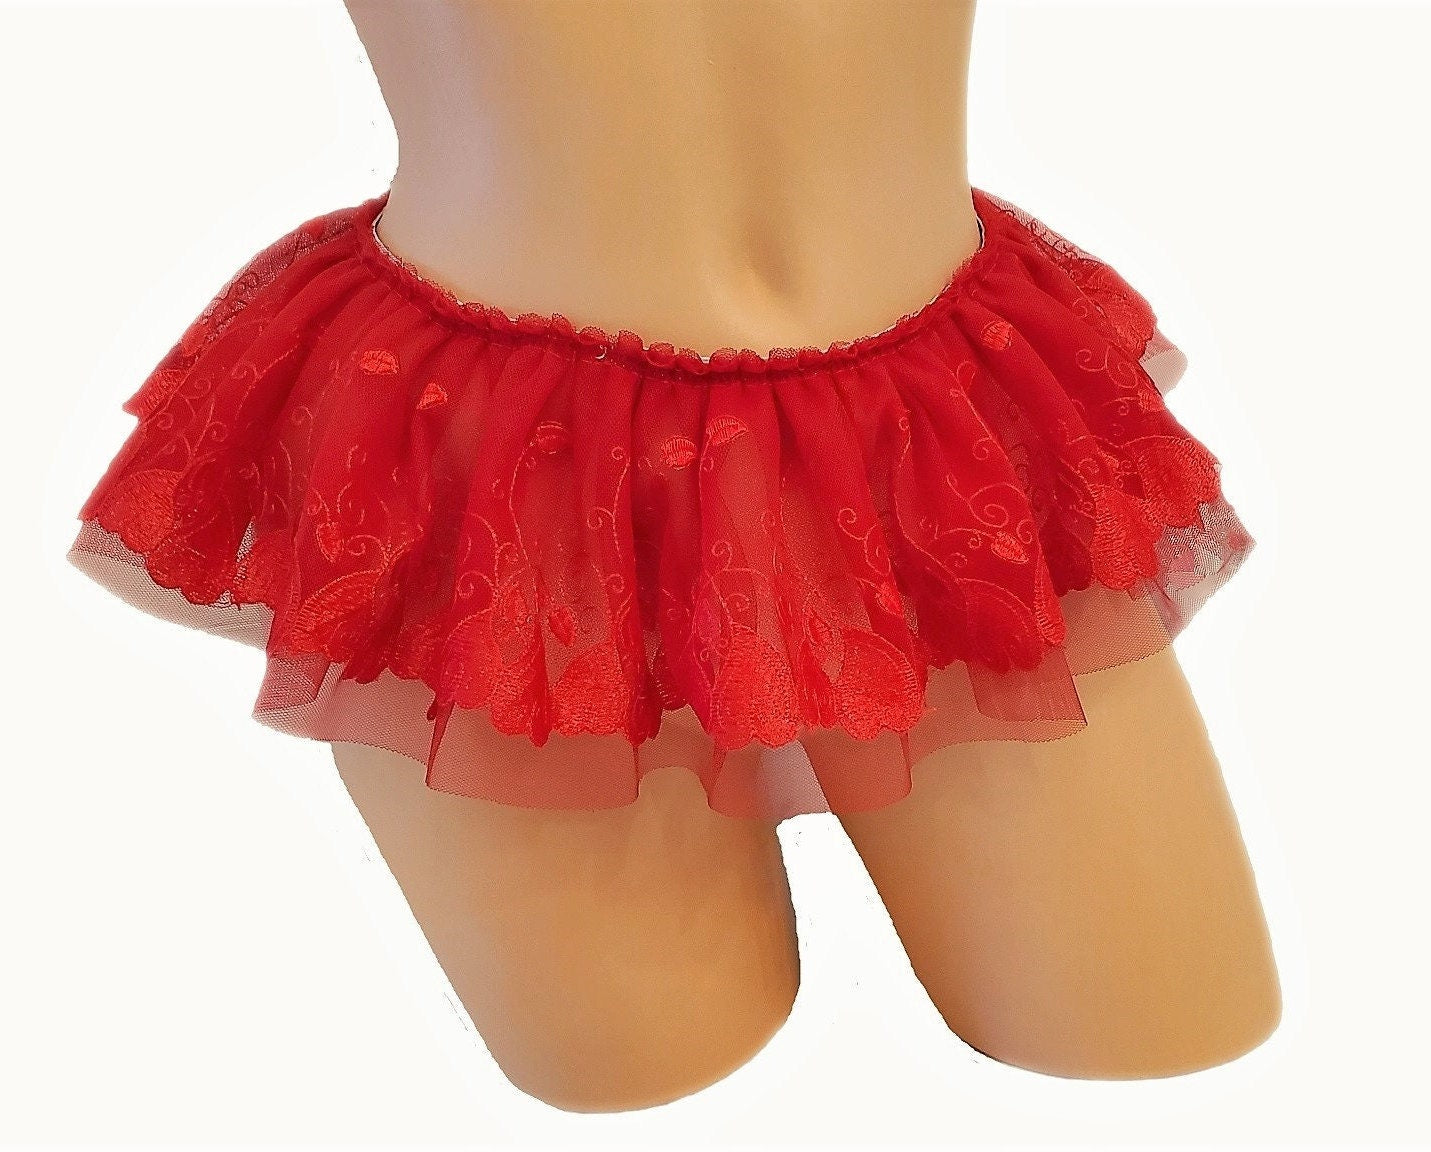 Red Micro Mini Lingerie Skirt with Hearts